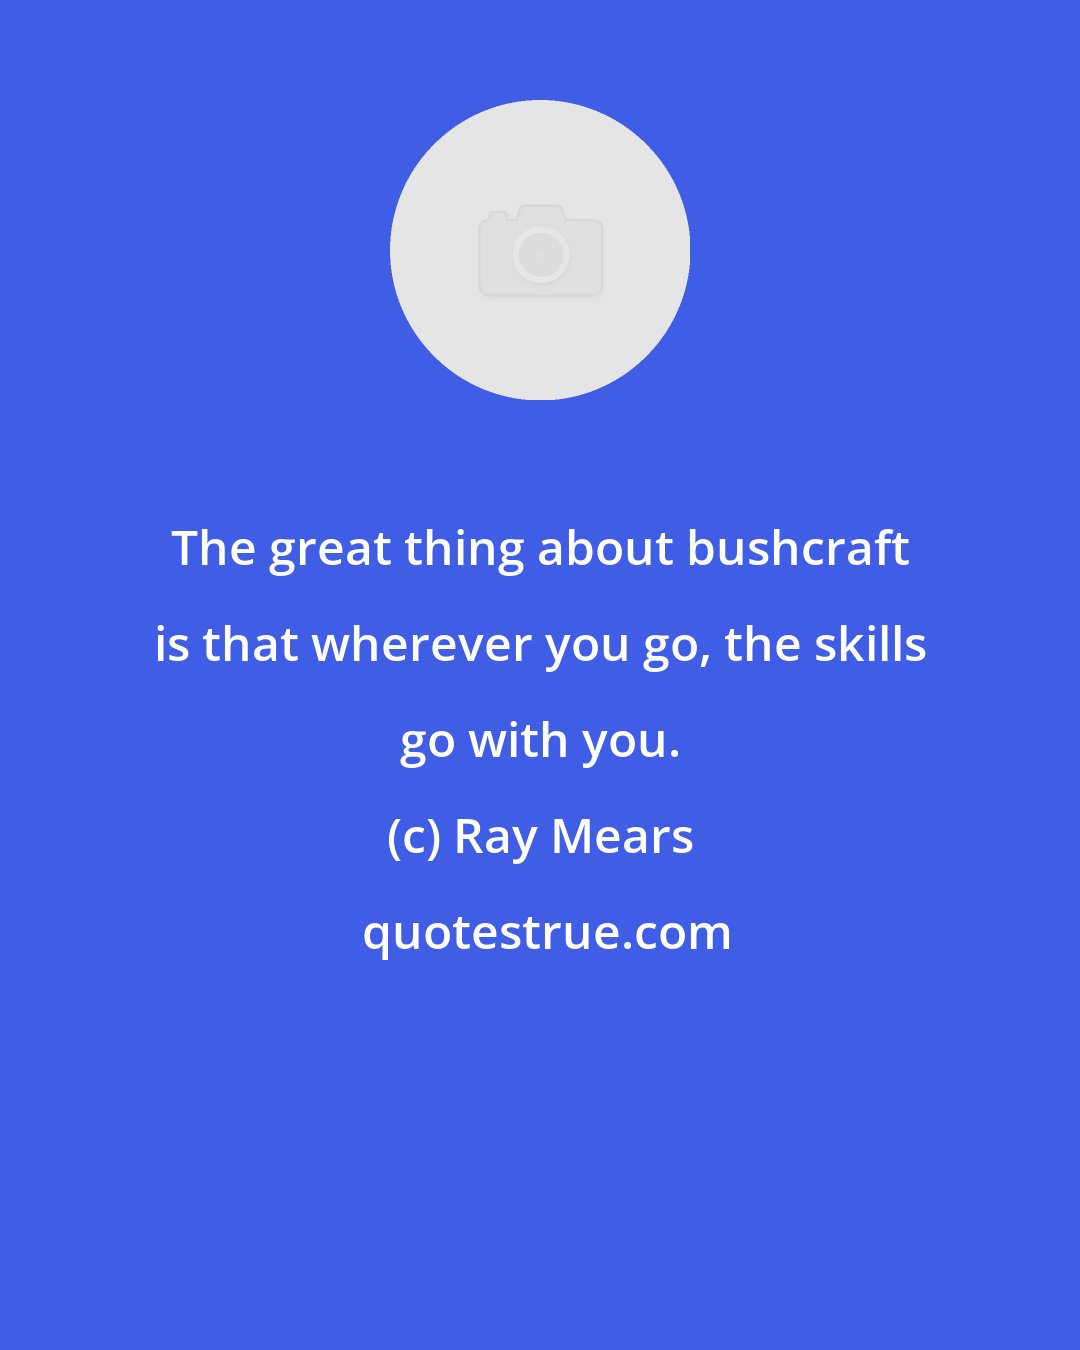 Ray Mears: The great thing about bushcraft is that wherever you go, the skills go with you.